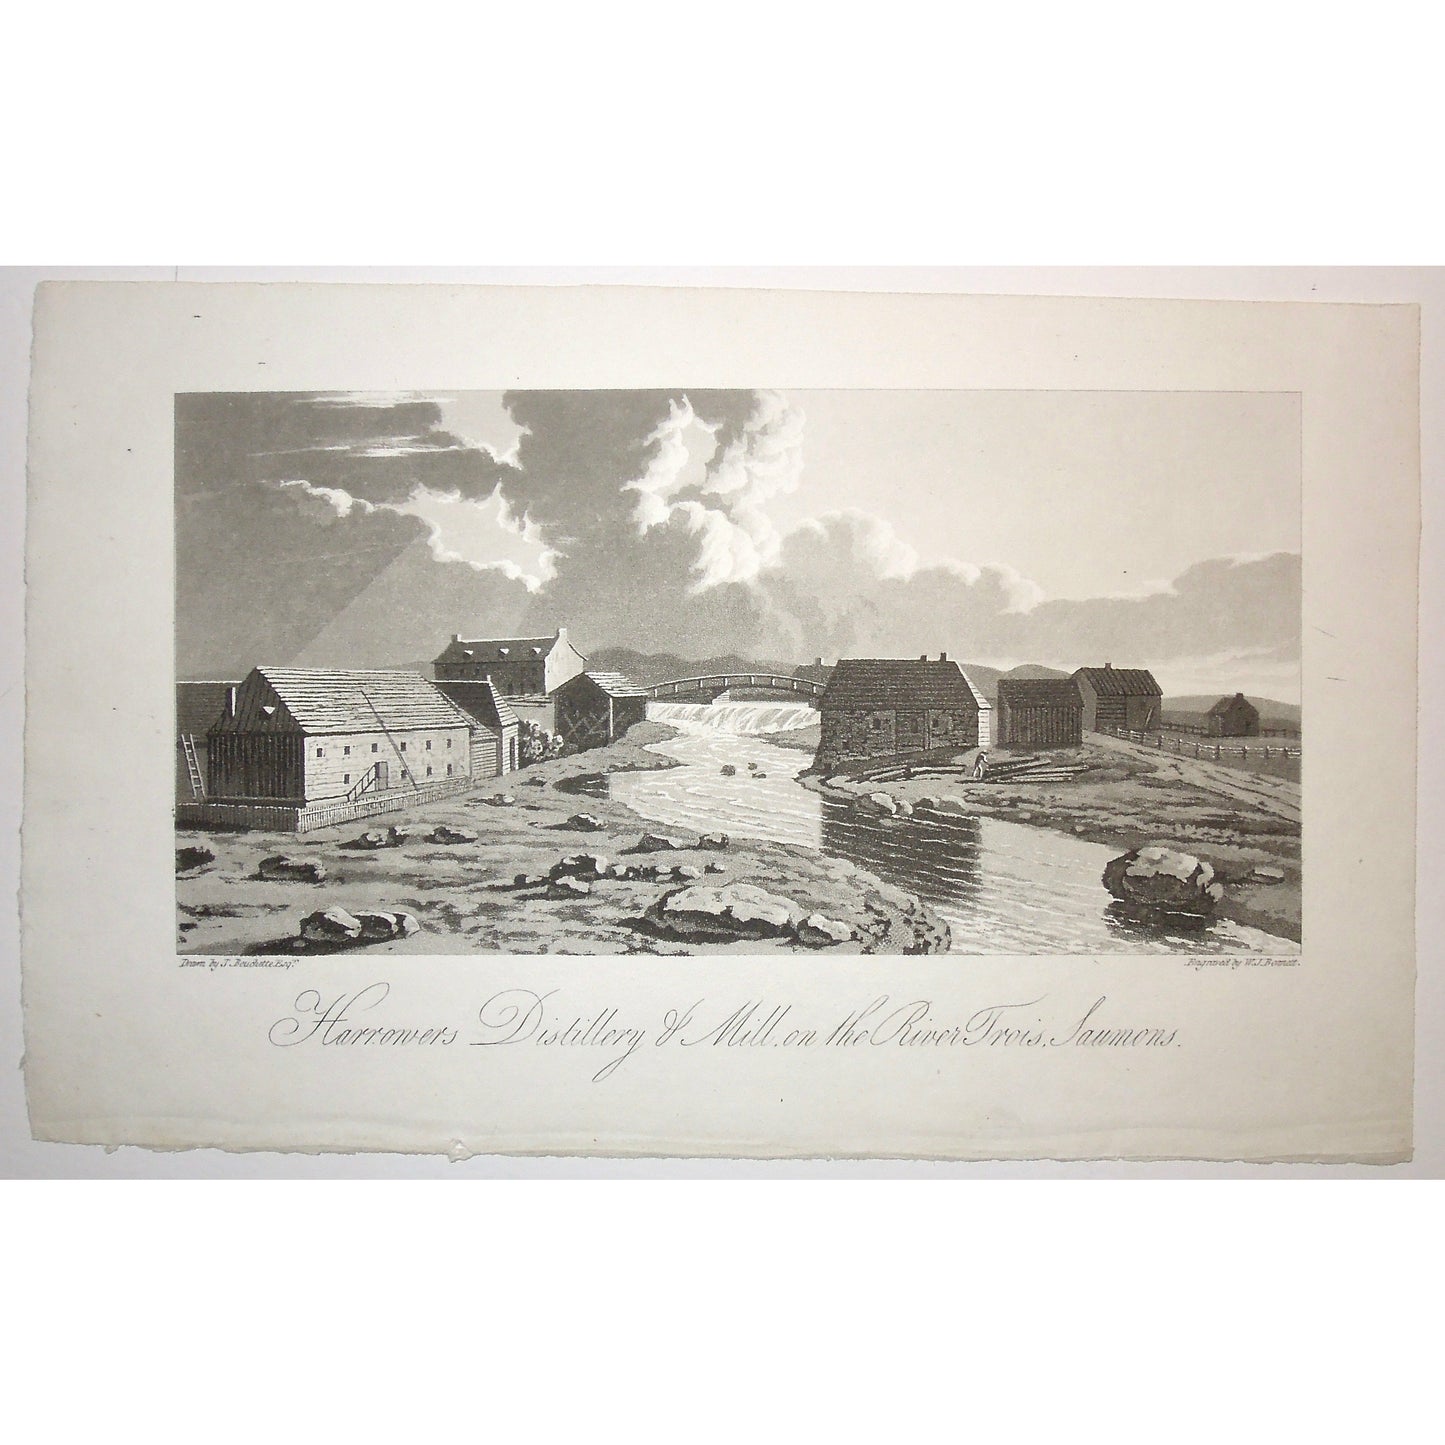 Harrowers Distillery, Harrowers, Distillery, Mill, River Trois Saumons, Riviere Trois Saumon, River, three salmon, building, bridge, town, A Topographical Description of the Province of Lower Canada, Lower Canada, Joseph Bouchette, Bouchette, 1815, W. Faden, Faden, W. J. Bennett, Bennett, Charing Cross, London, steel engraving, black and white, Antique, Prints, Canadian History, Historical, Original, Artwork, Home decor, Design, Art, Canadiana, Collectors,